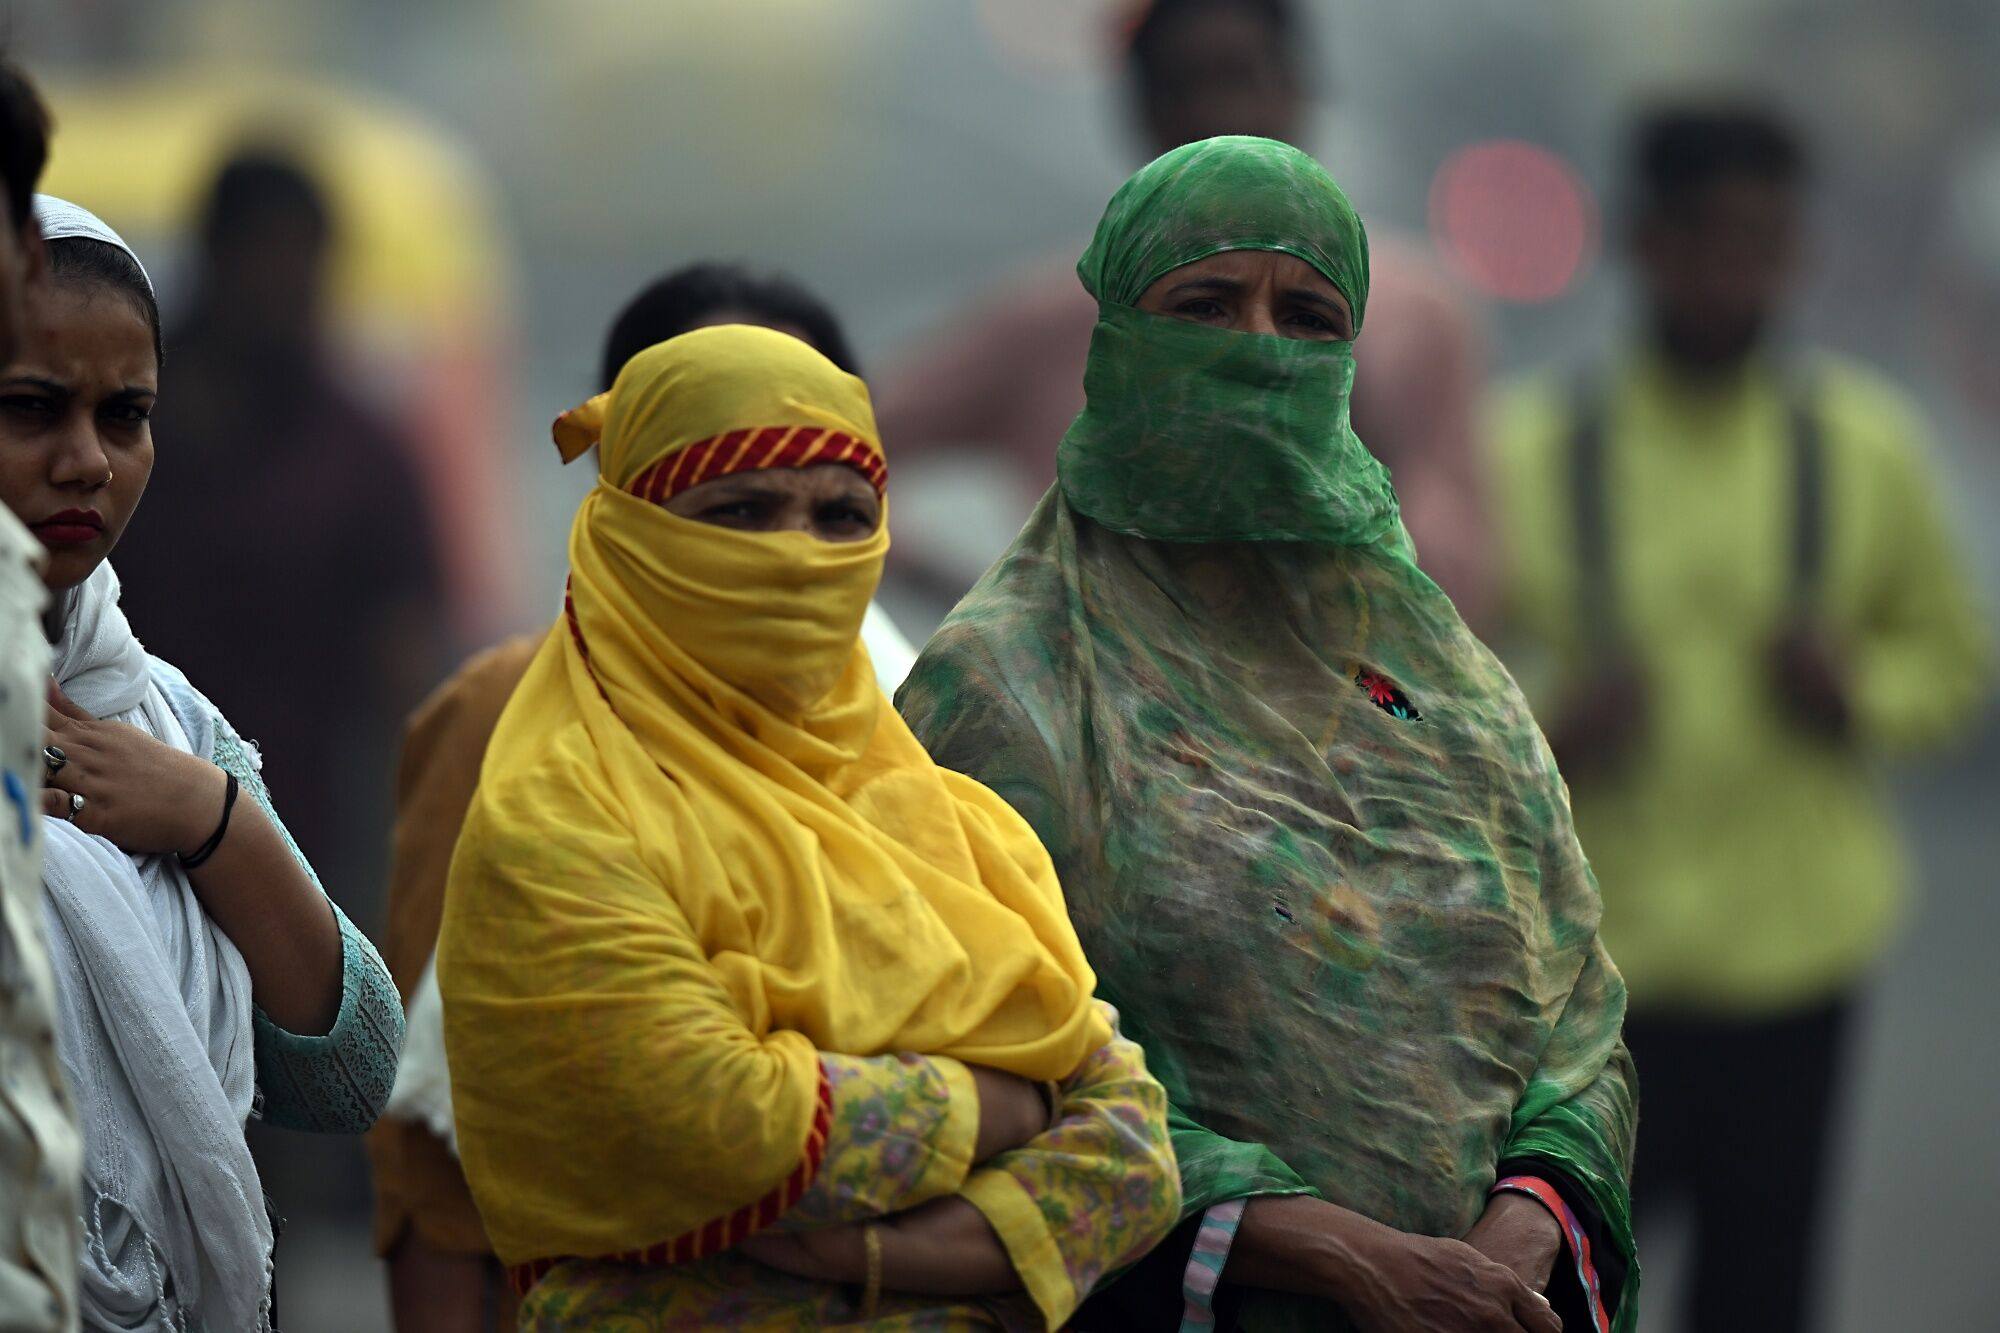 Dangerous levels of air pollution in India cause health problems for many, including chronic heart and lung conditions, which in turn take their own toll on the economy. Photo: Bloomberg